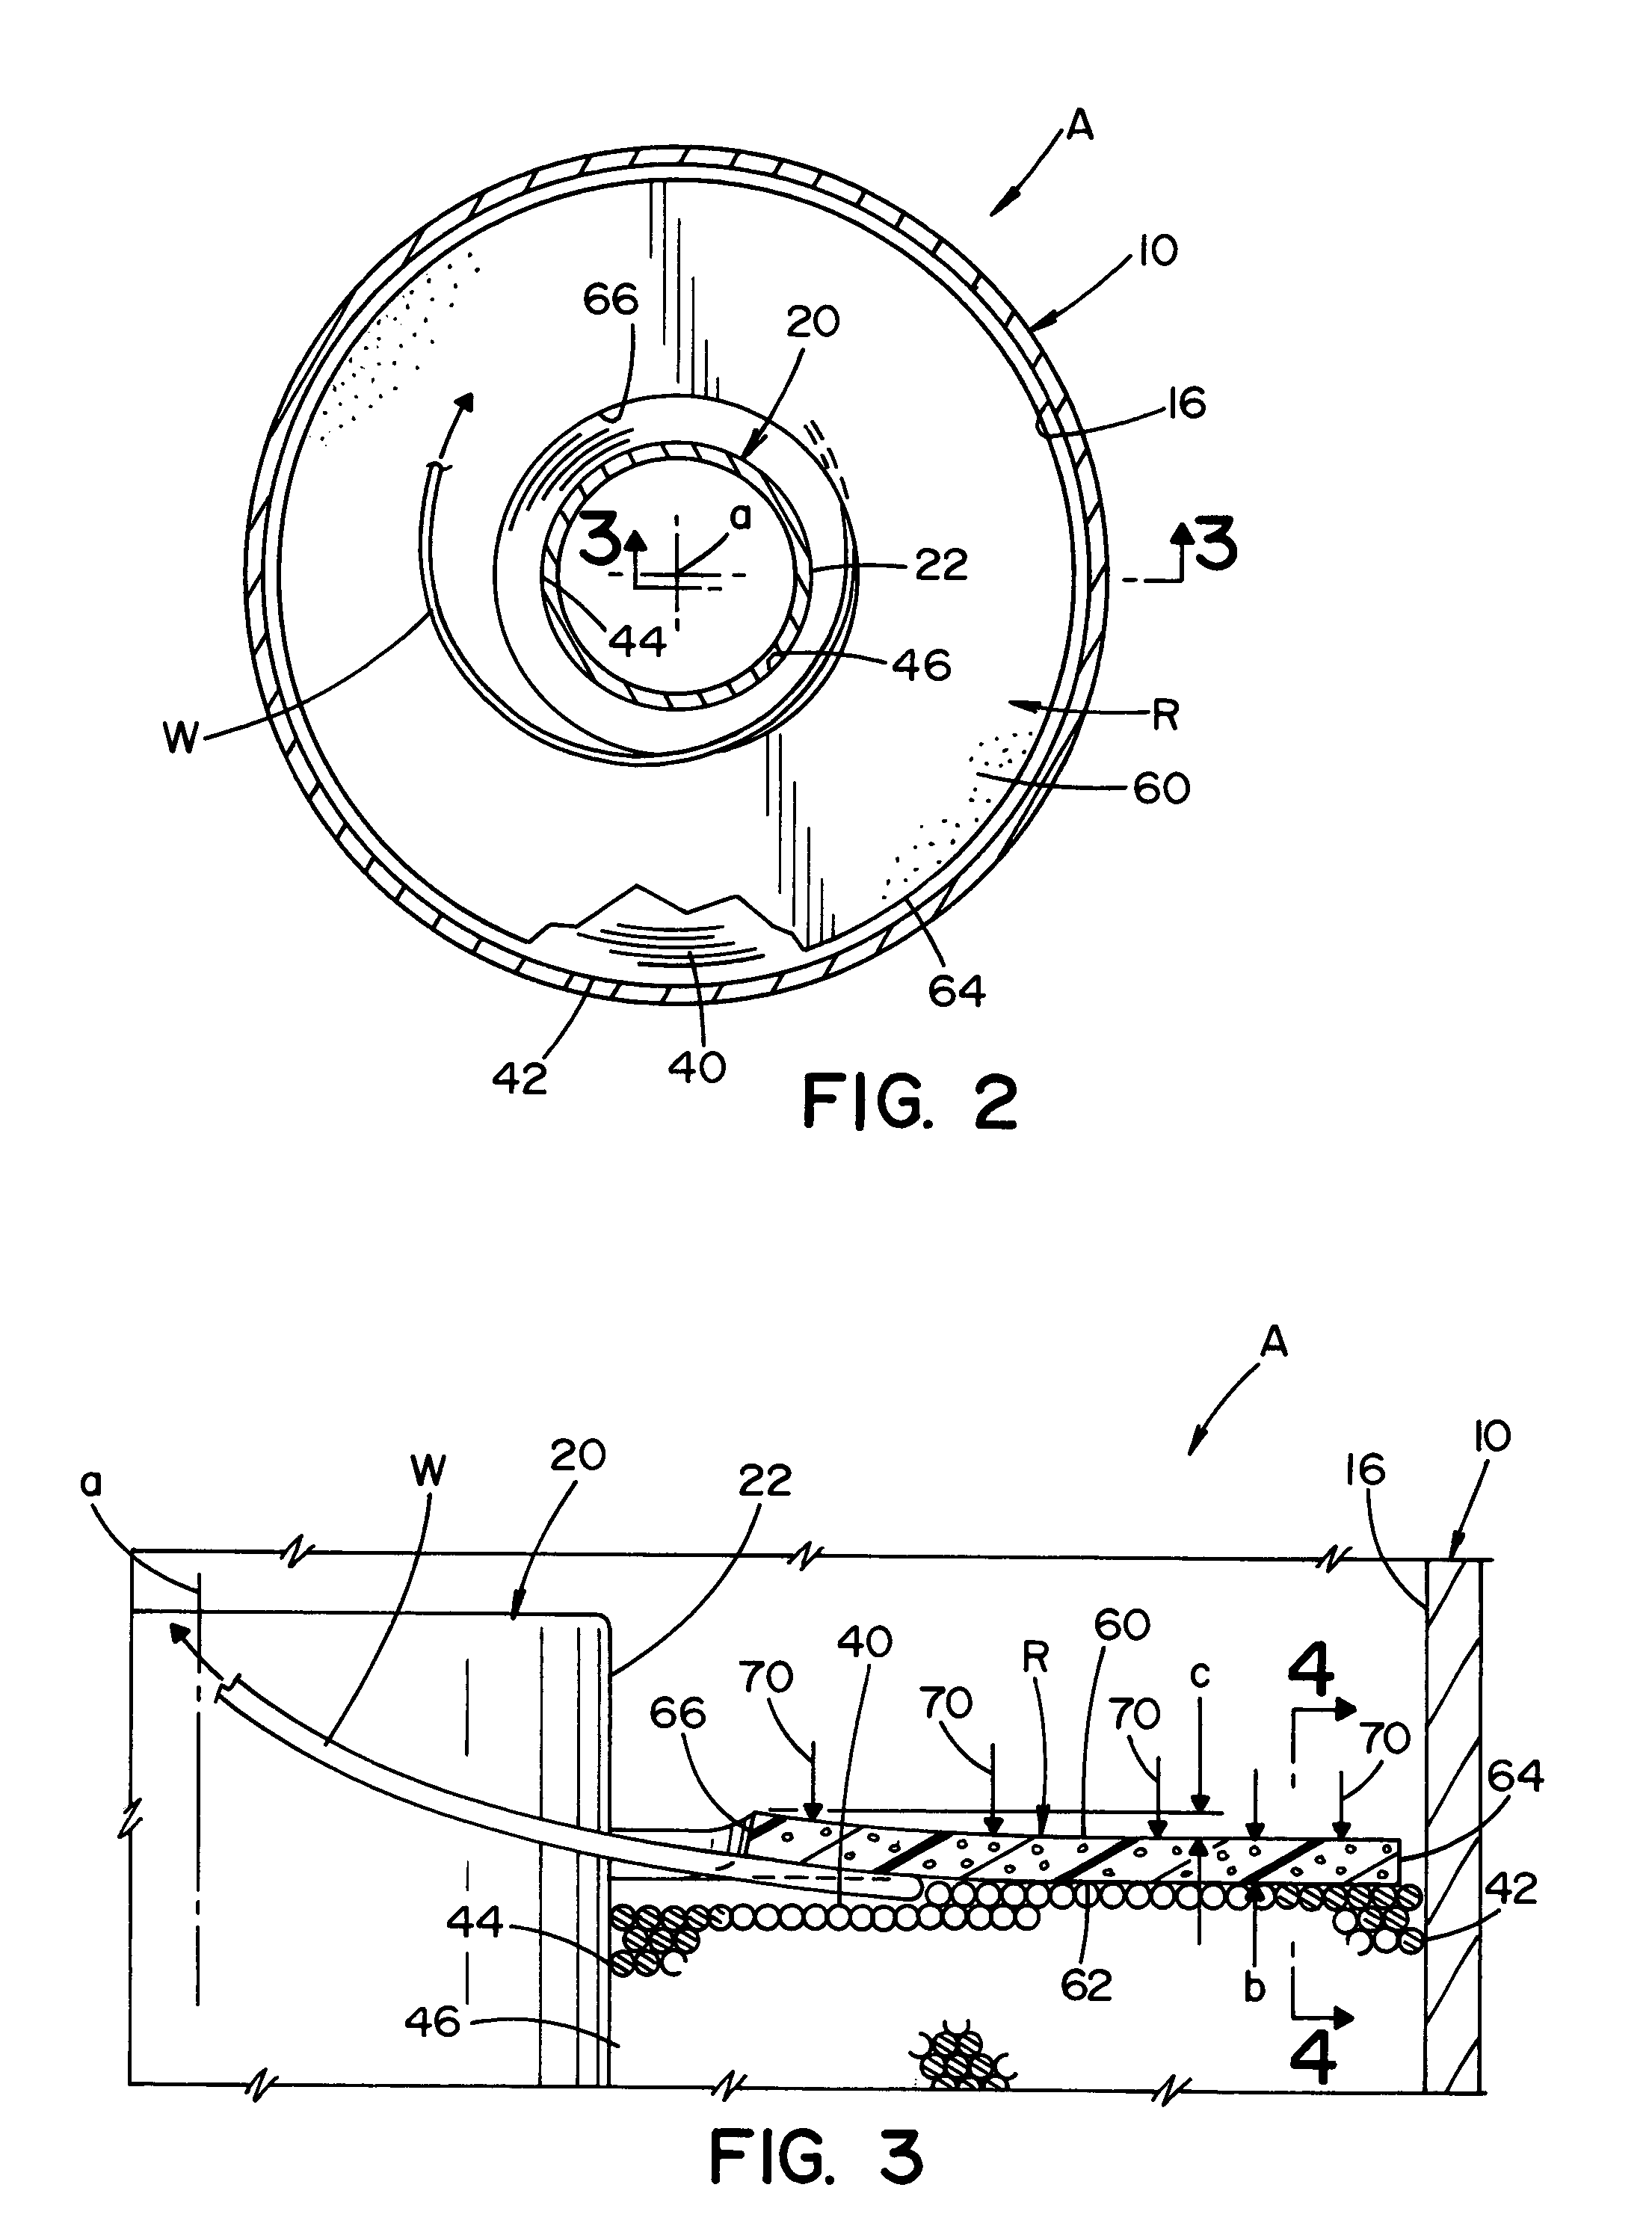 Retainer ring for wire package